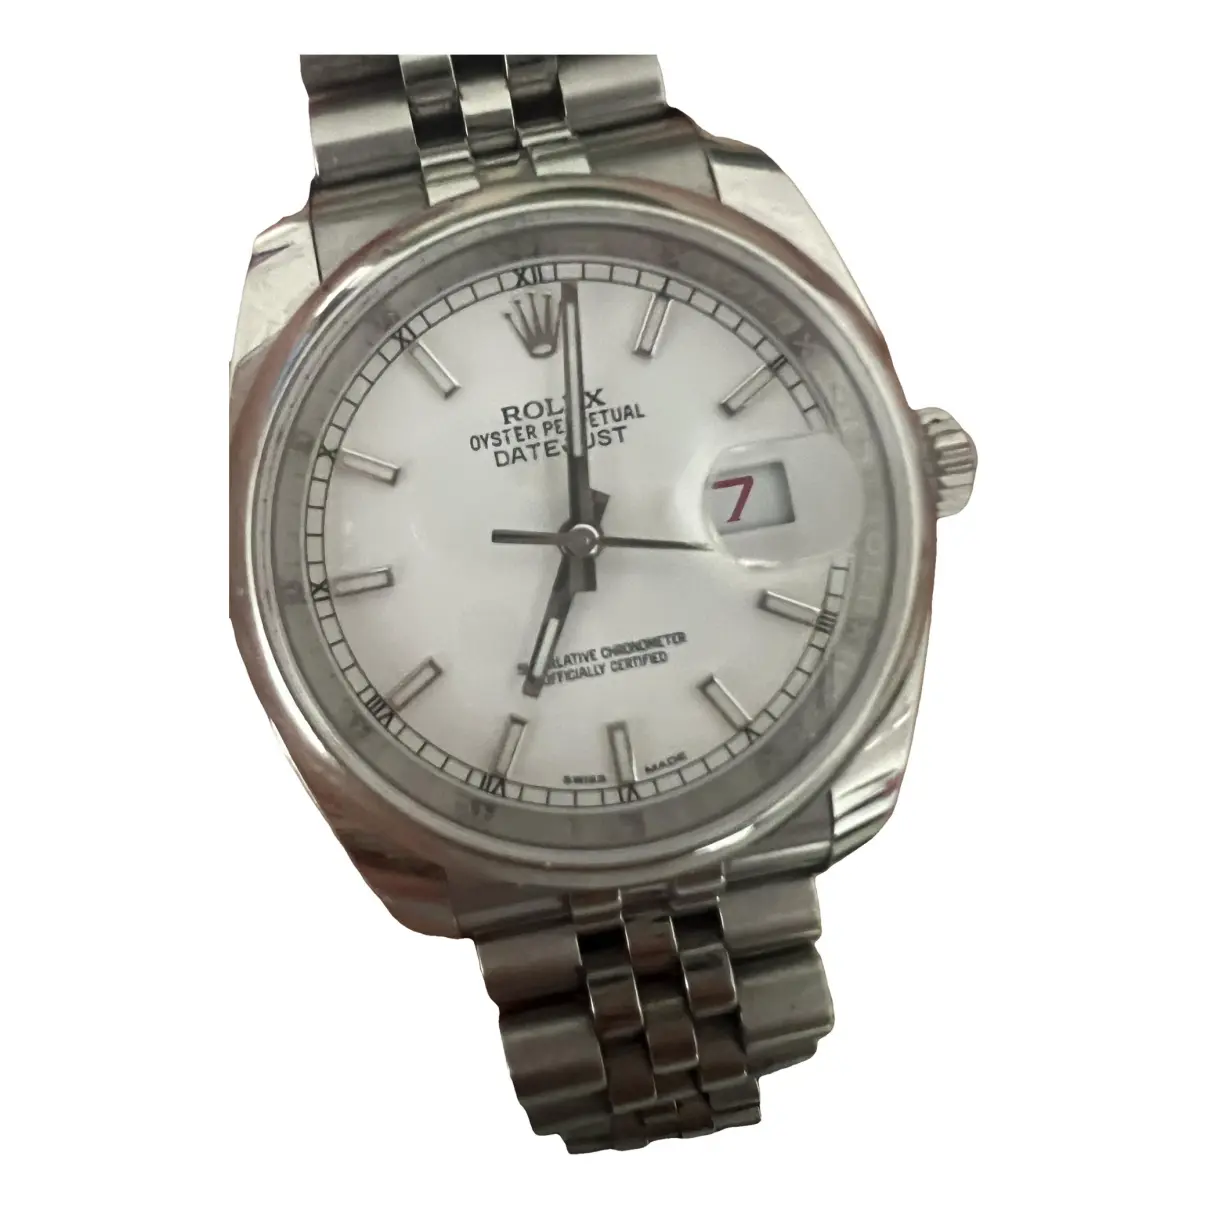 Oyster Perpetual silver watch